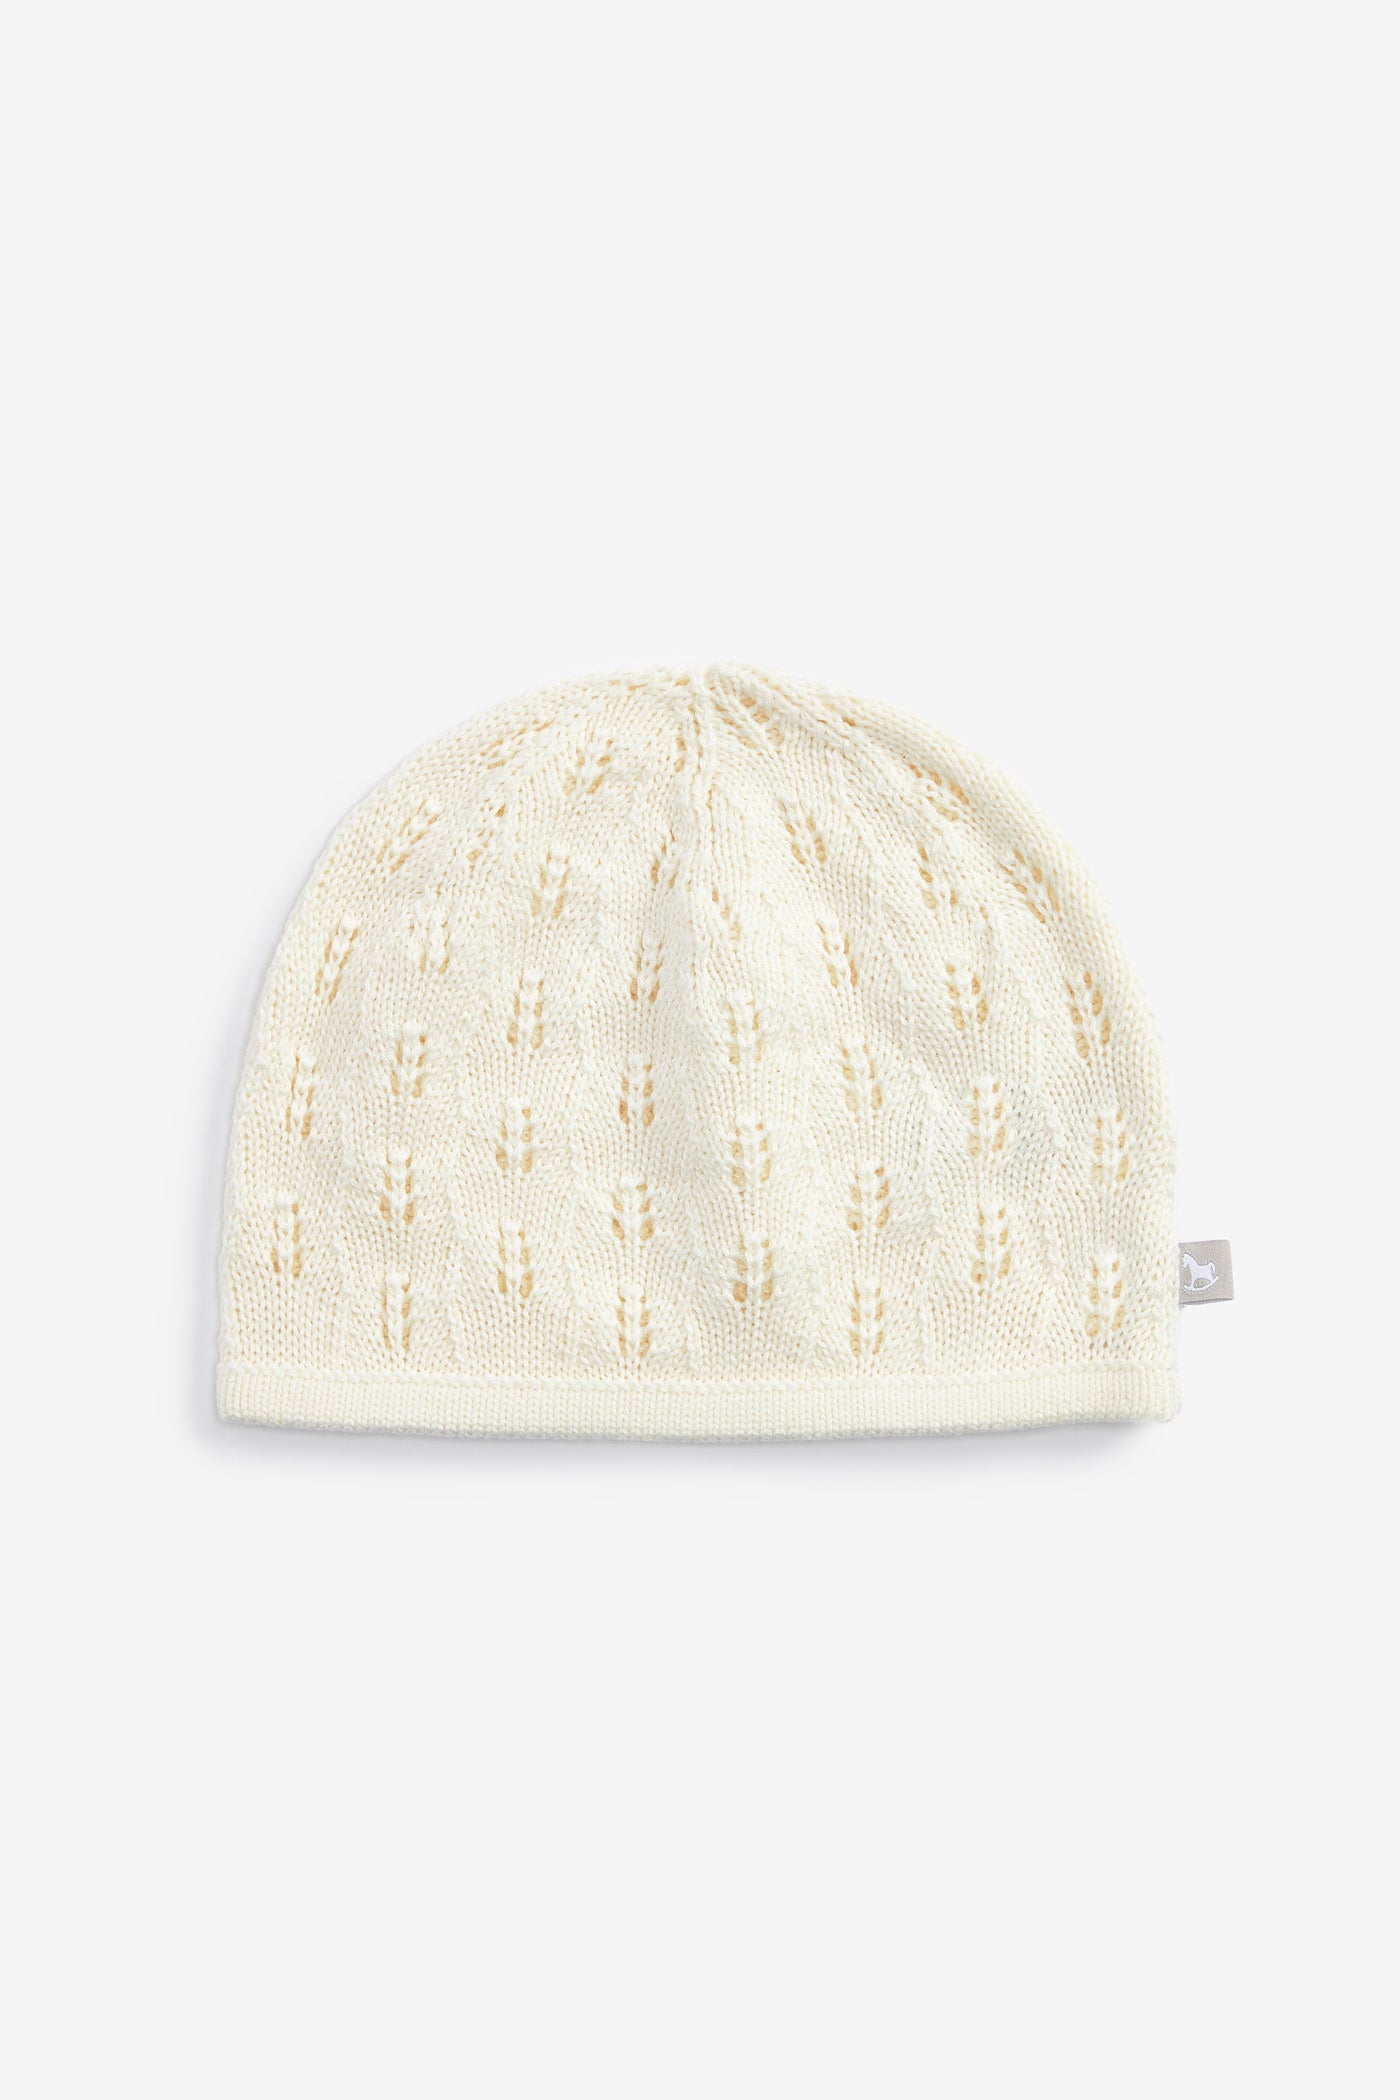 Cotton Knitted Hat, cream